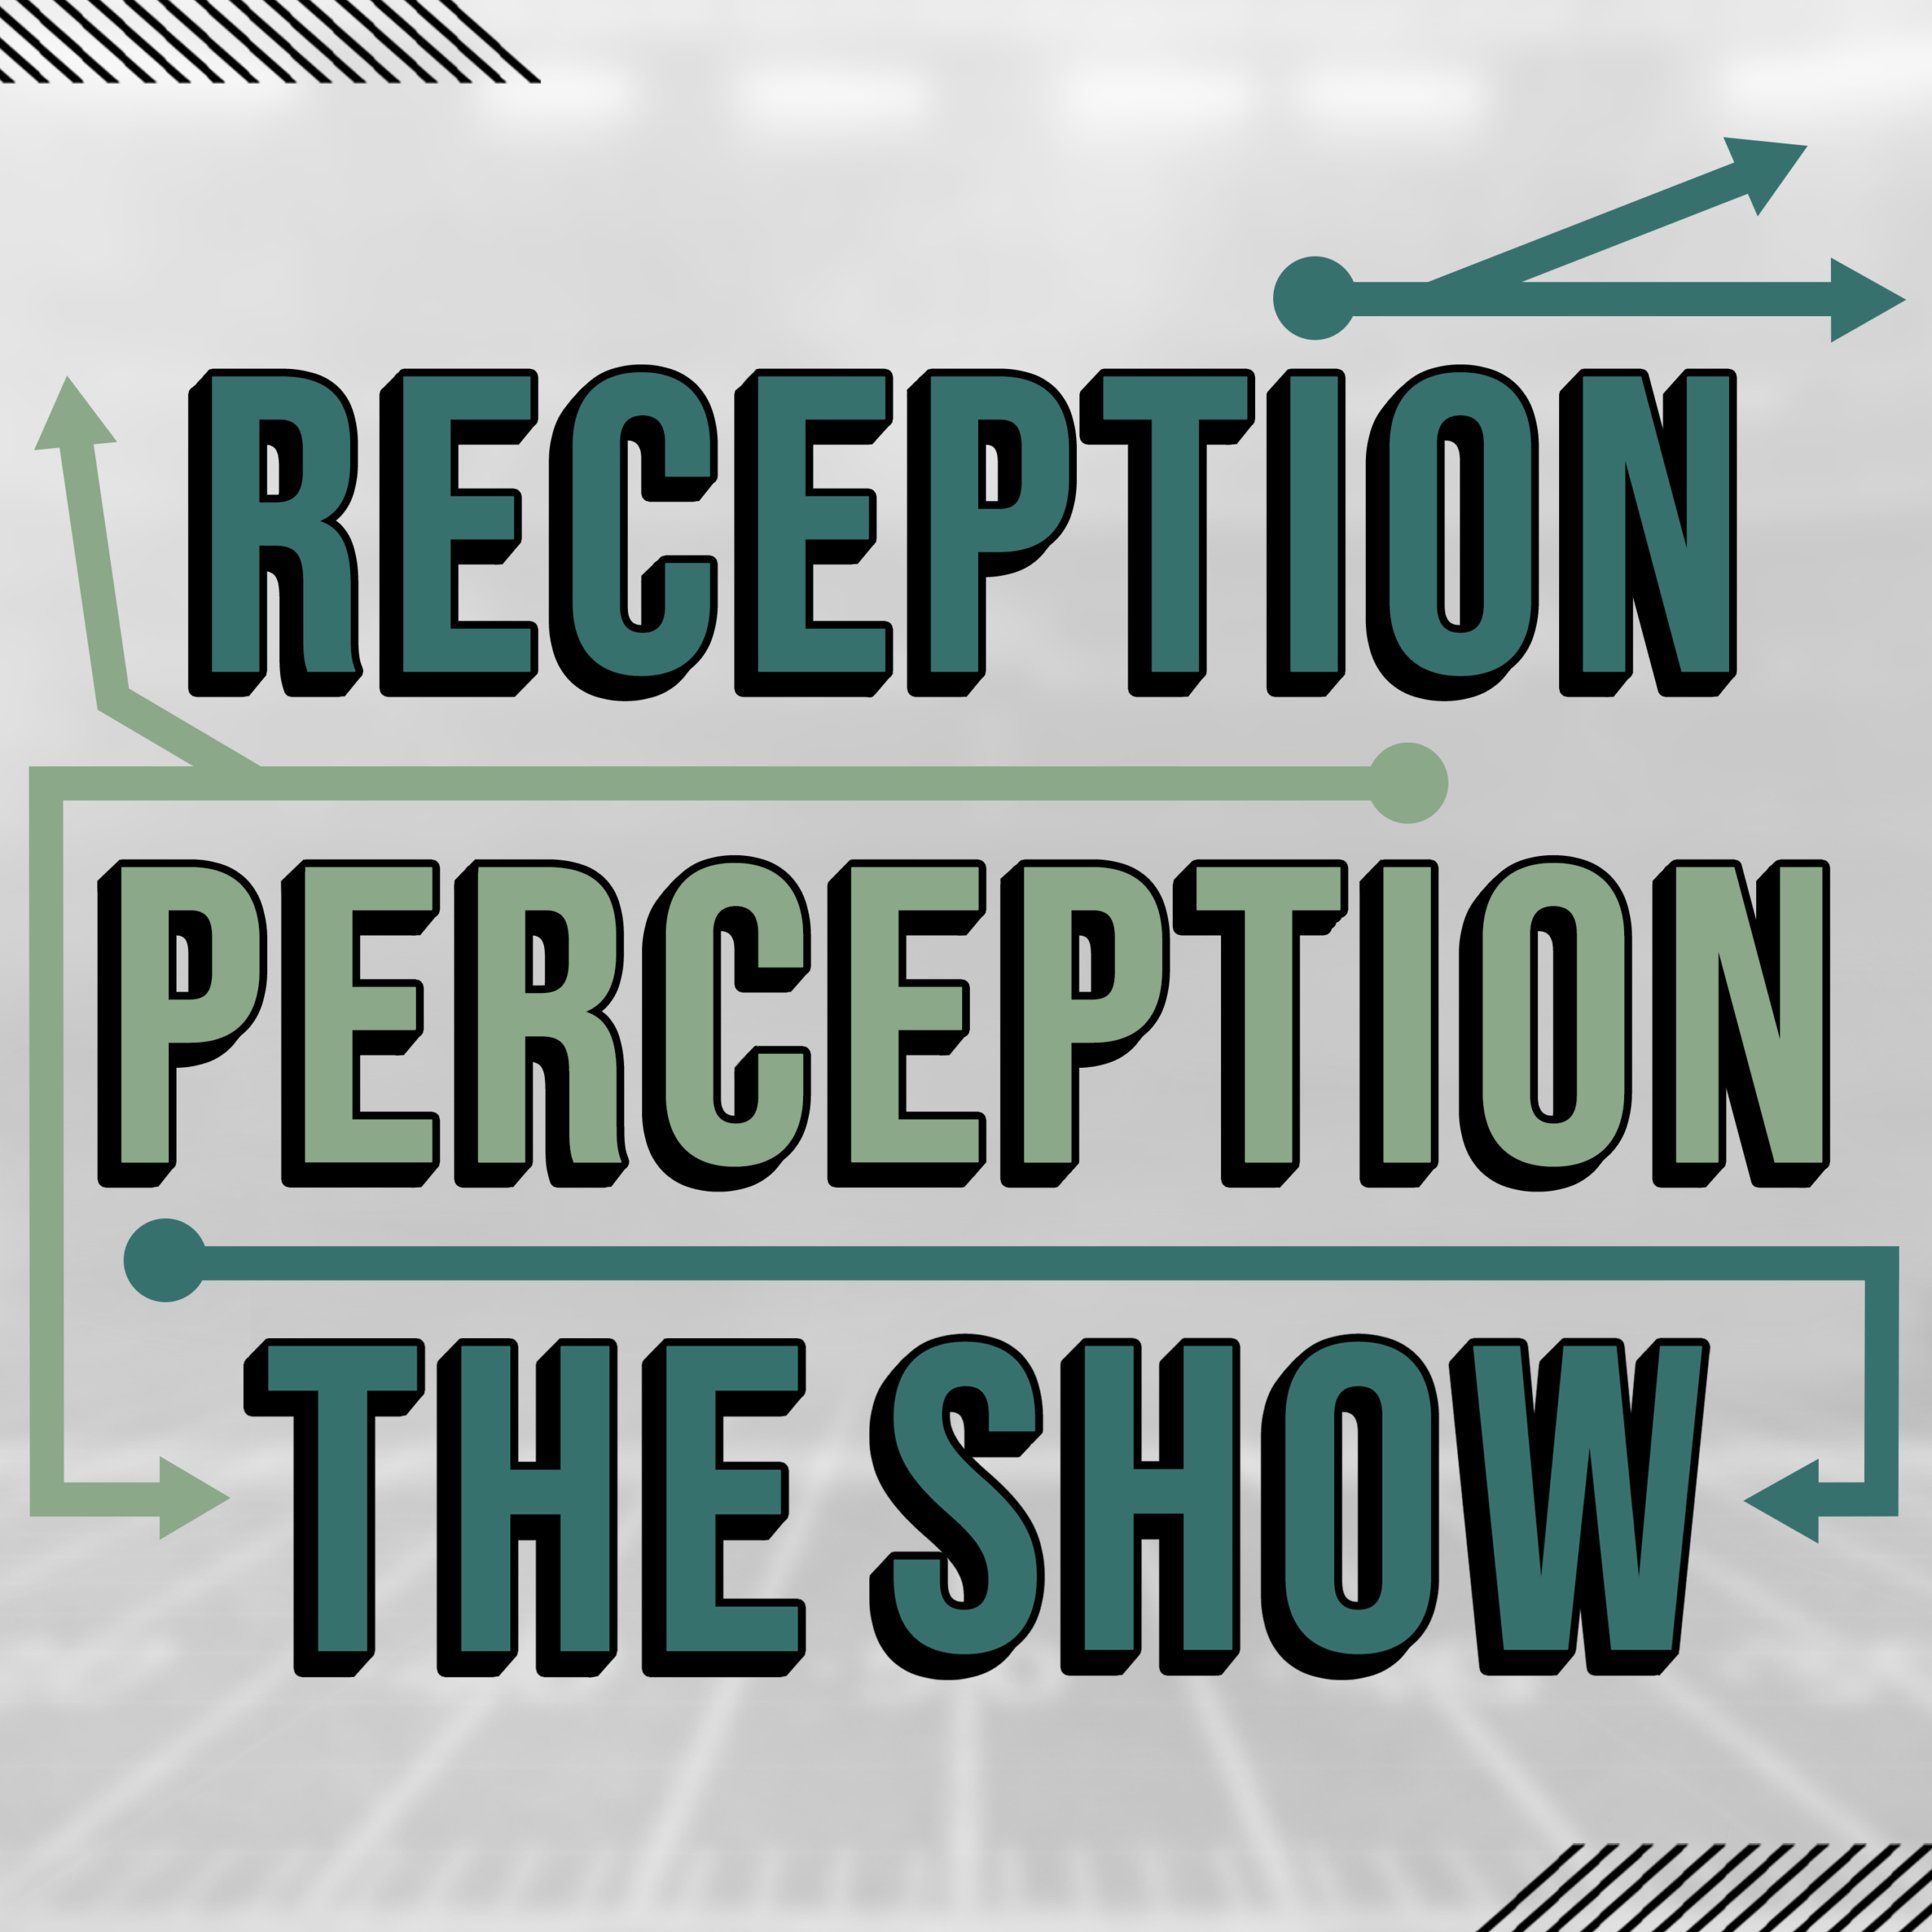 Reception Perception The Show – Defining What A Superstar Receiver Is